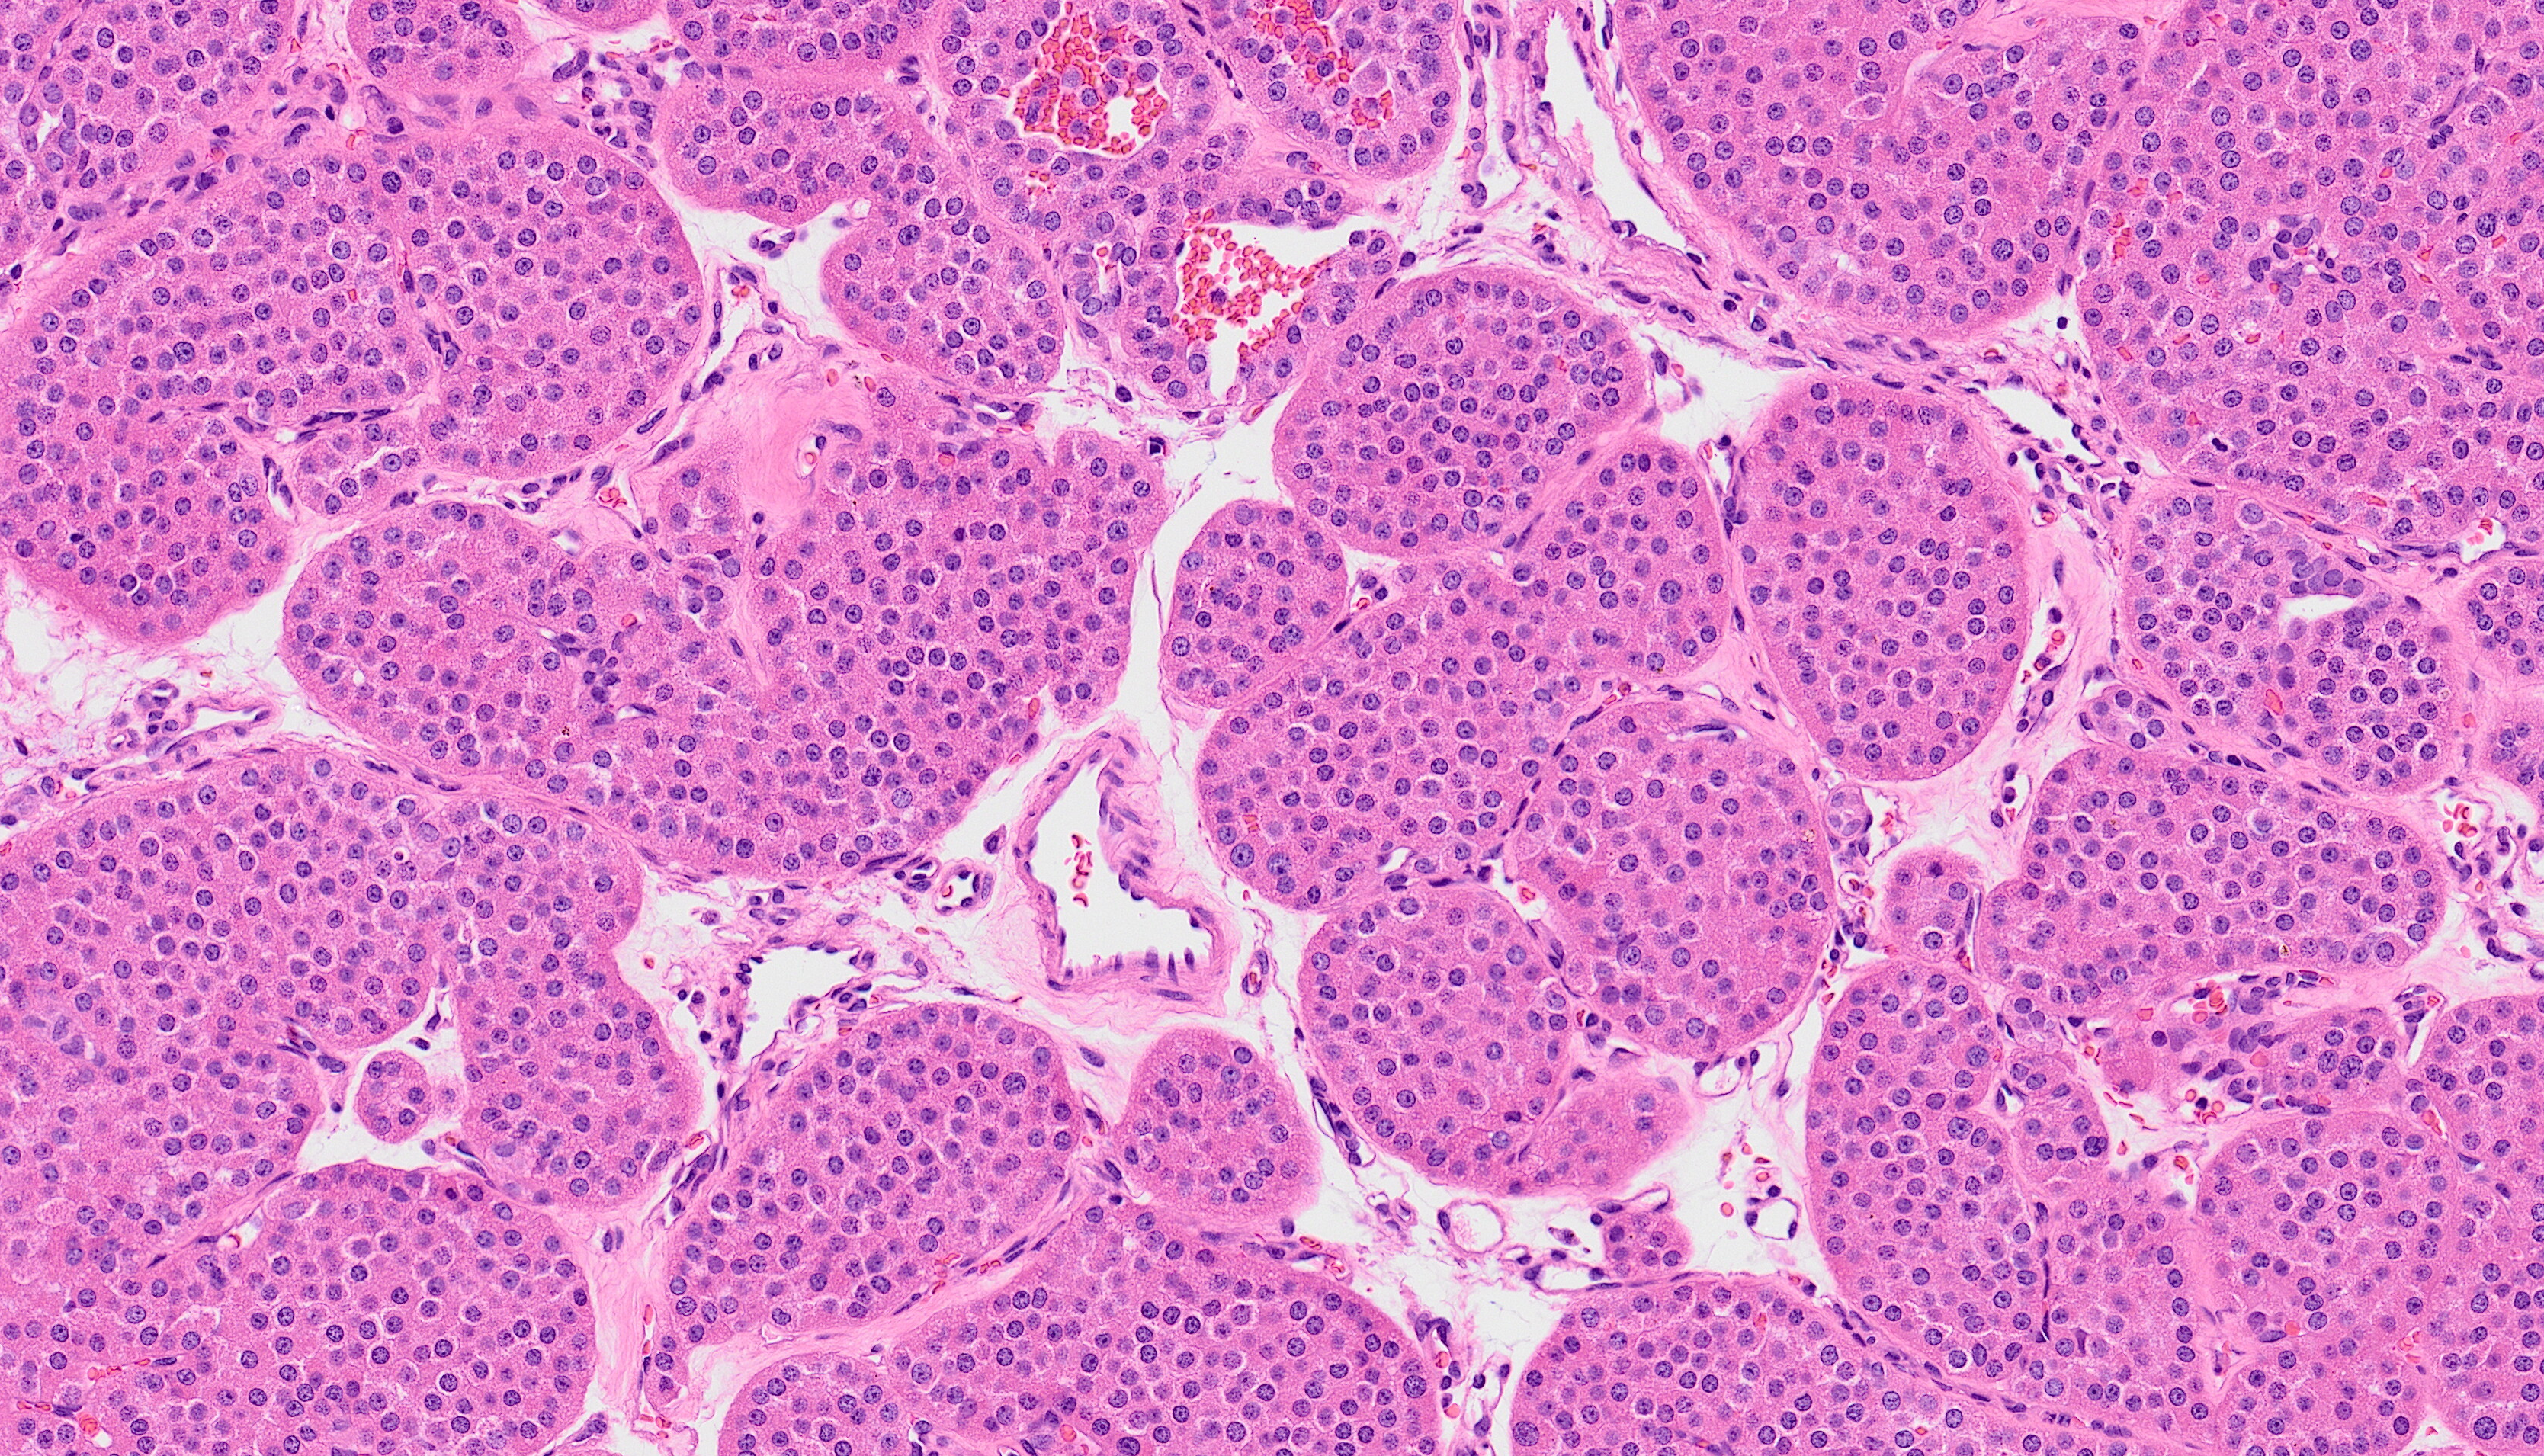 In this classic renal oncocytoma, one can appreciate the well-stained nests and islands of oncocytes set in edematous and vascular stroma.